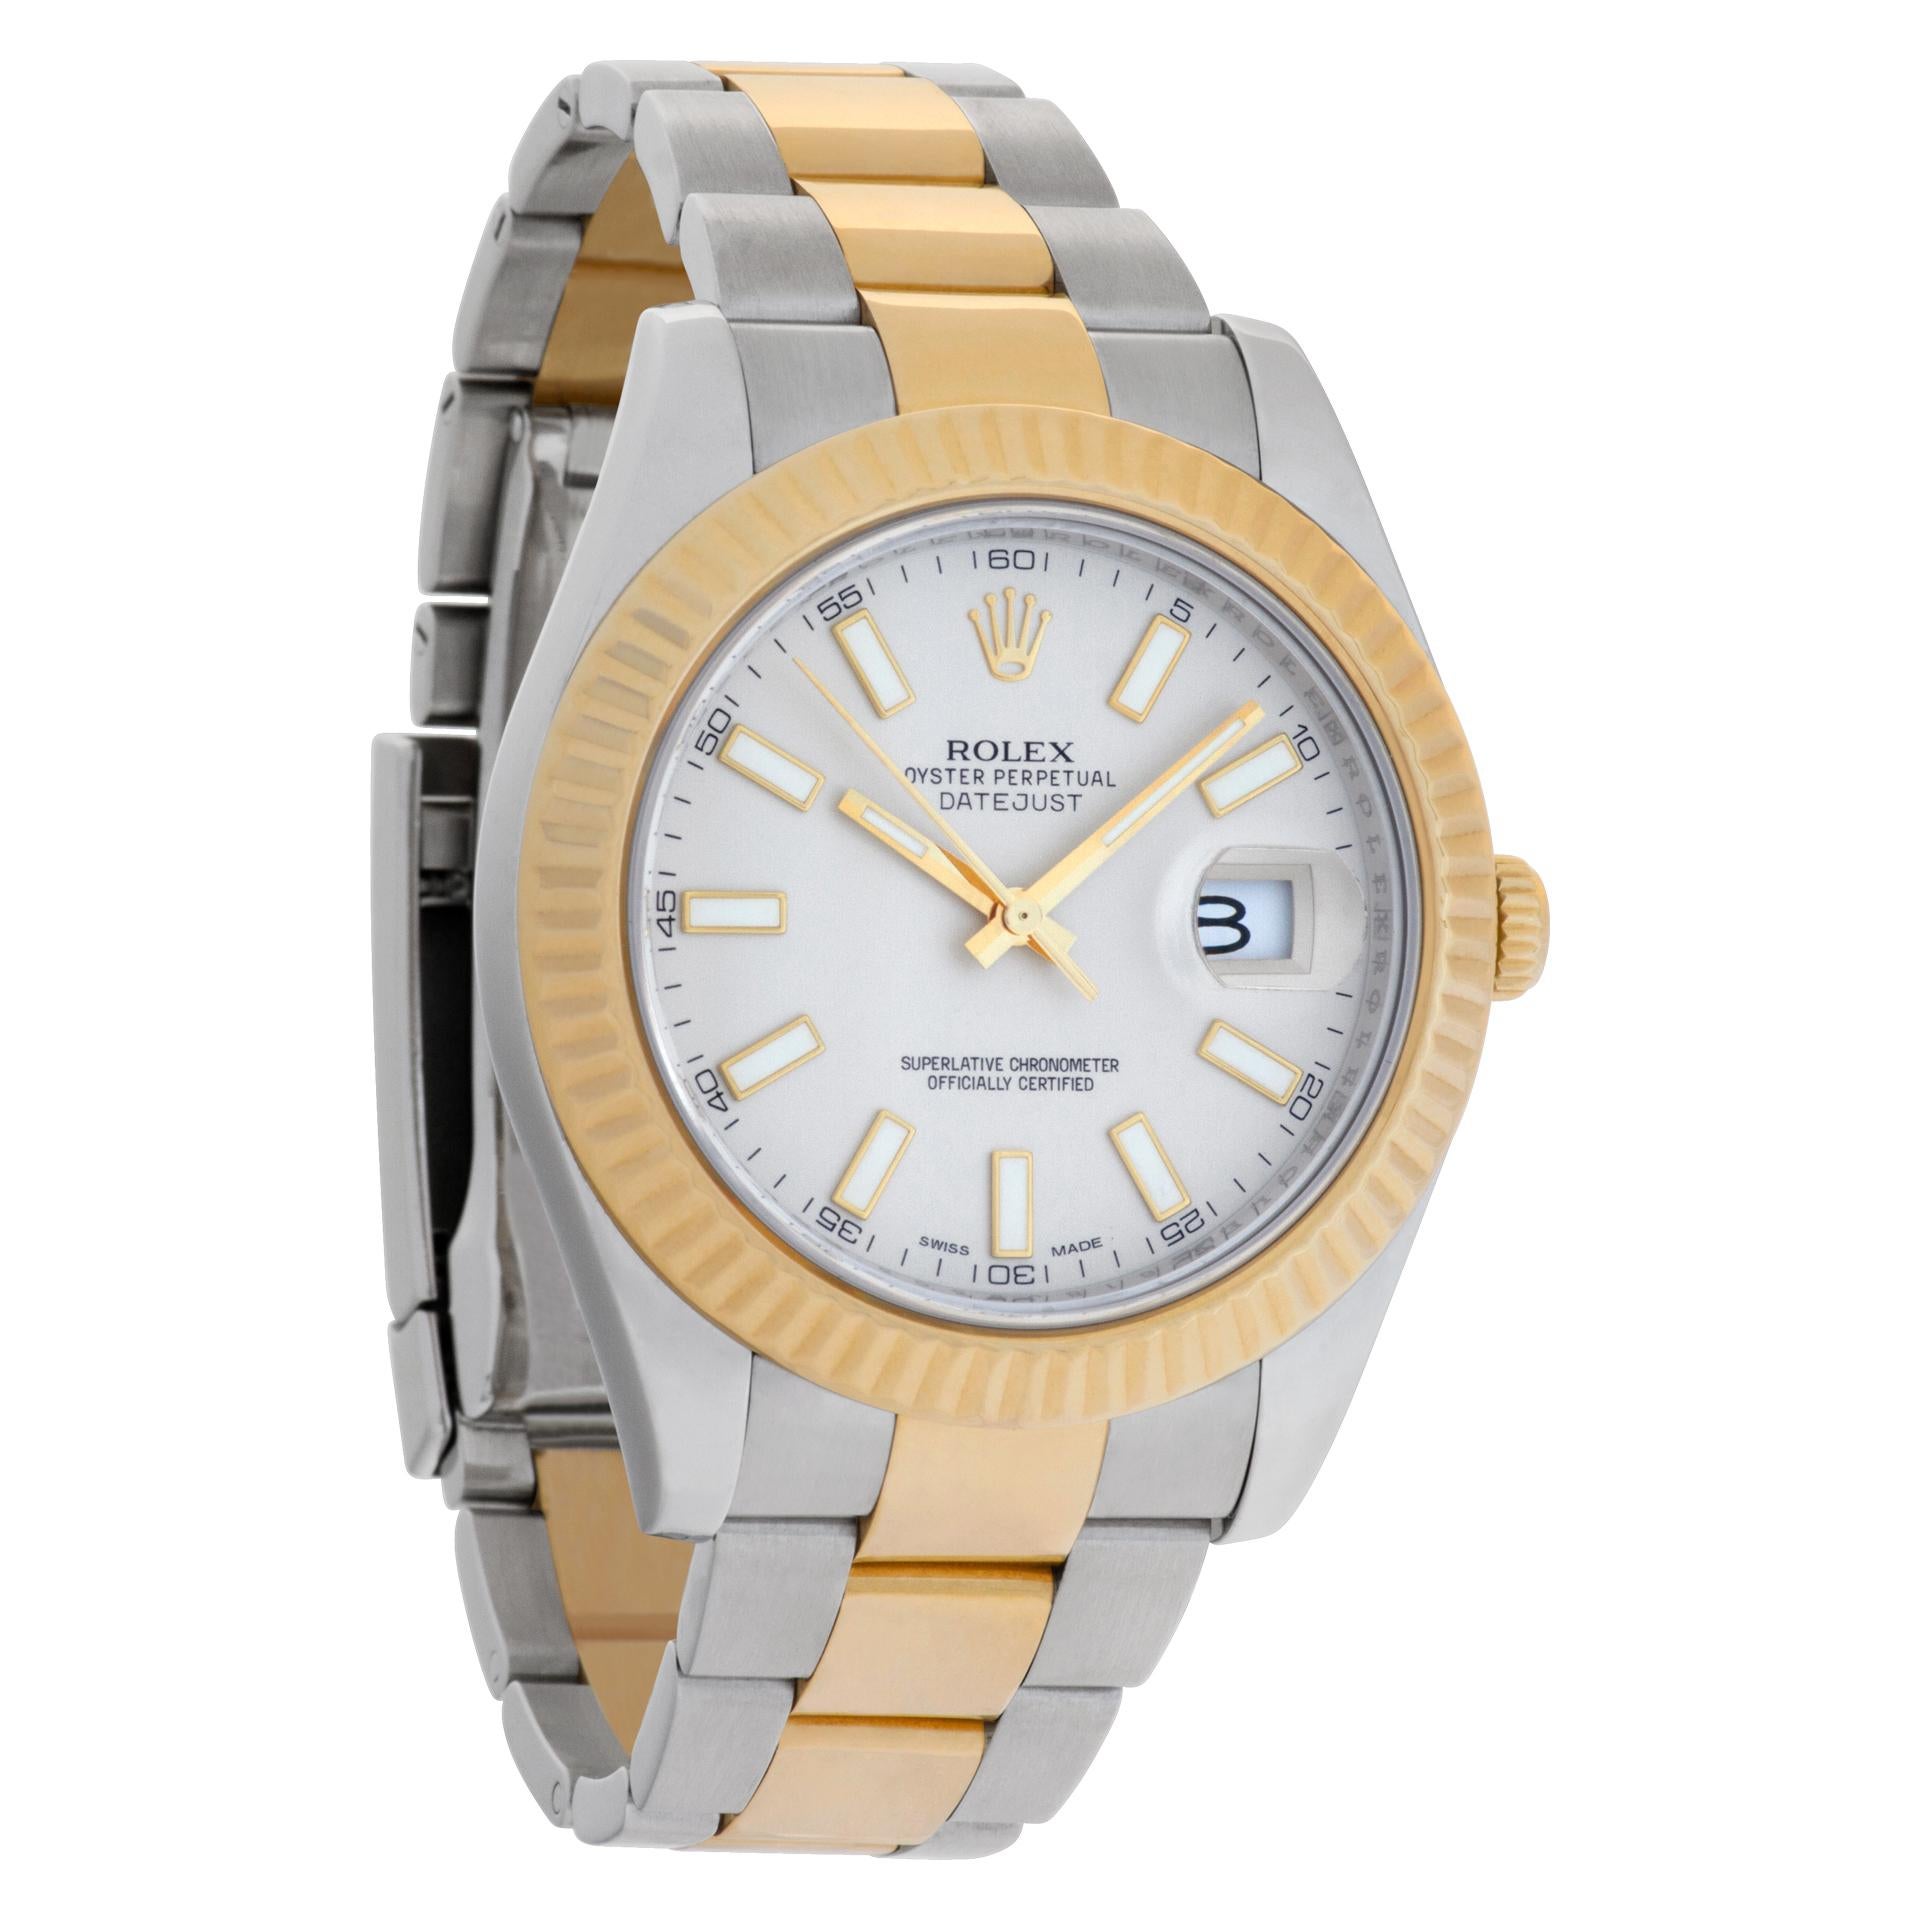 Rolex Datejust II in 18k gold & stainless steel with fluted bezel. Auto w/ sweep seconds and date. 41 mm case size. Ref 116333. **Bank Wire Only at this price.** Fine Pre-owned Rolex Watch. Certified preowned Classic Rolex Datejust II 116333 watch